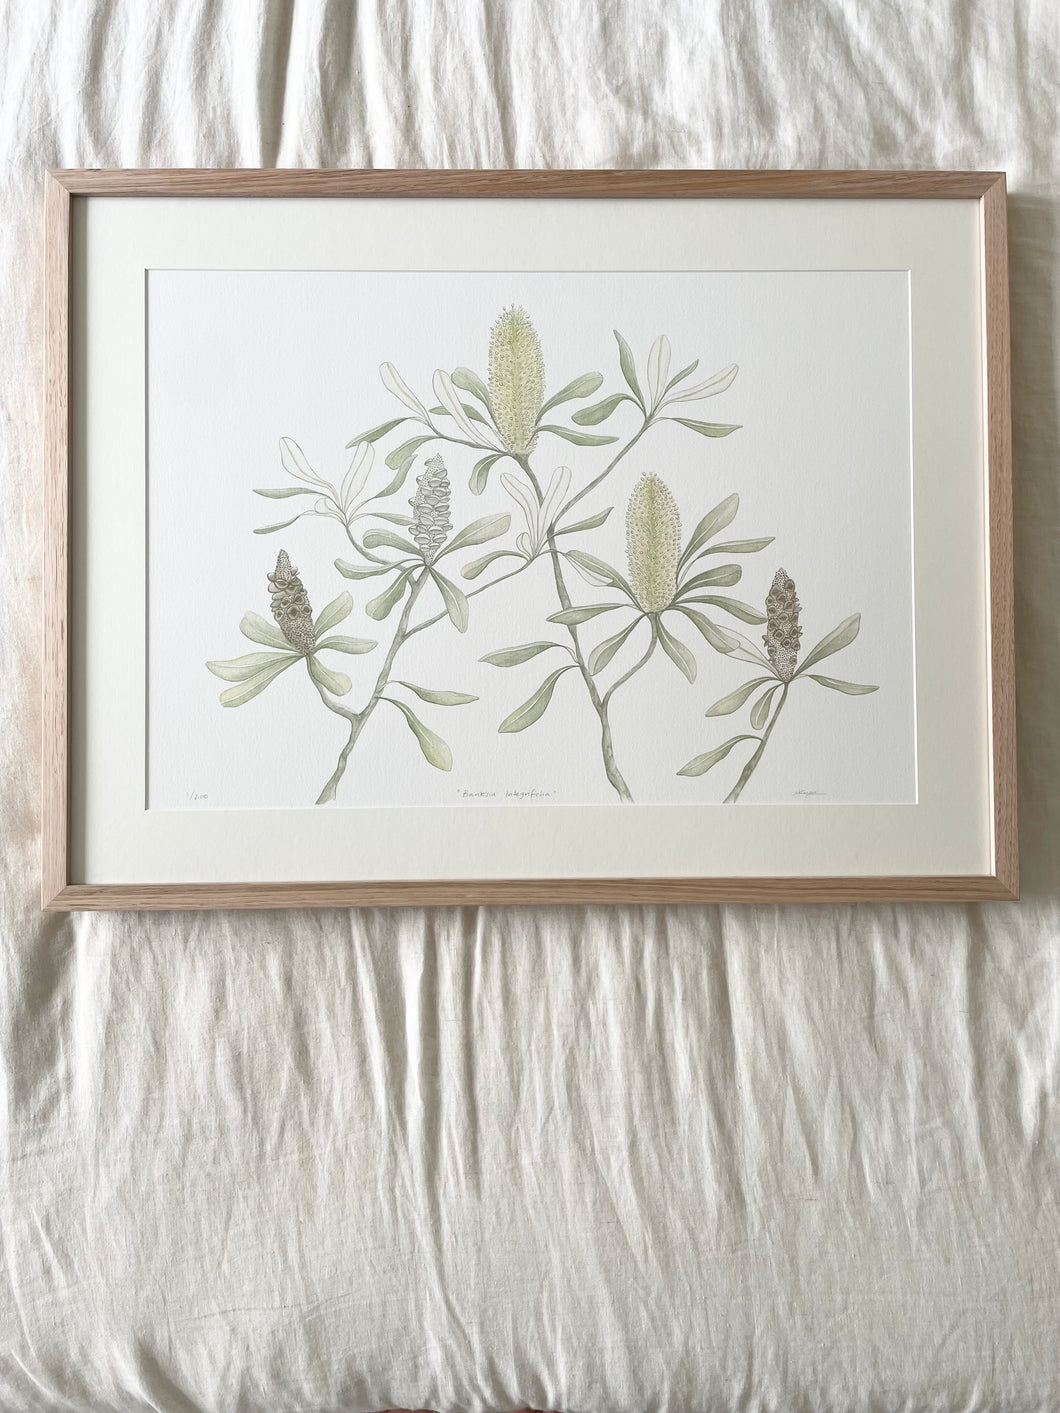 Banksia Integrifolia | Framed Limited Edition